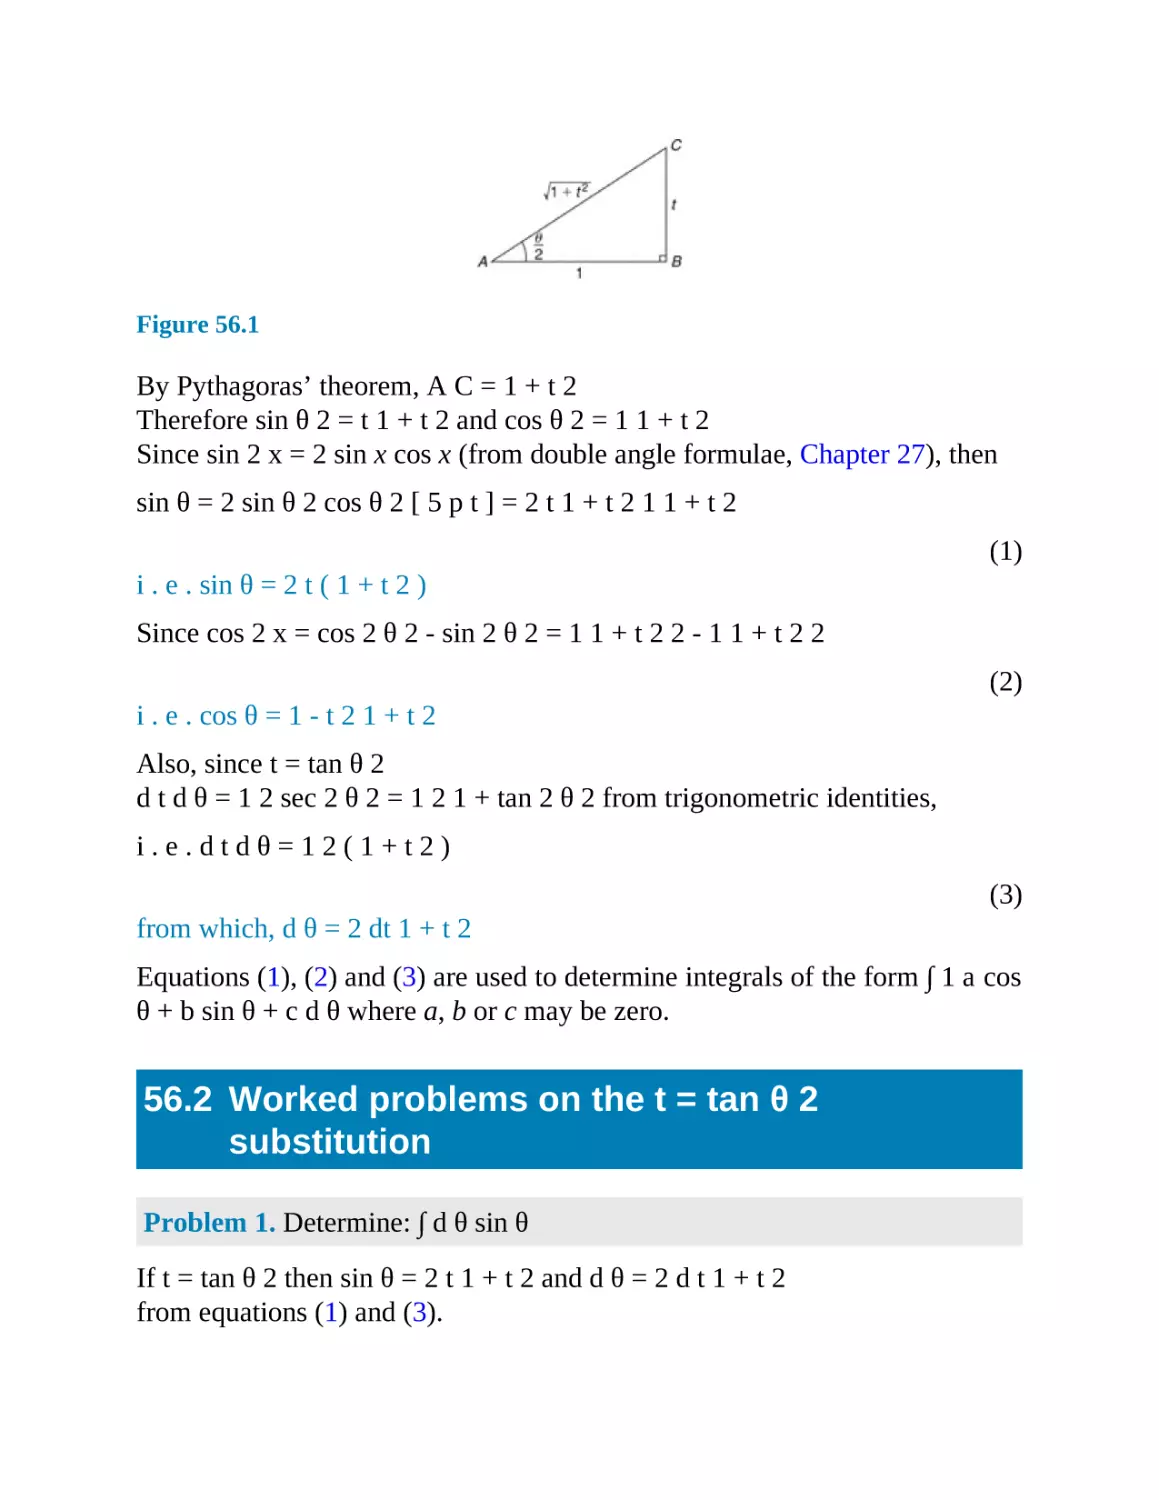 56.2 Worked problems on the substitution